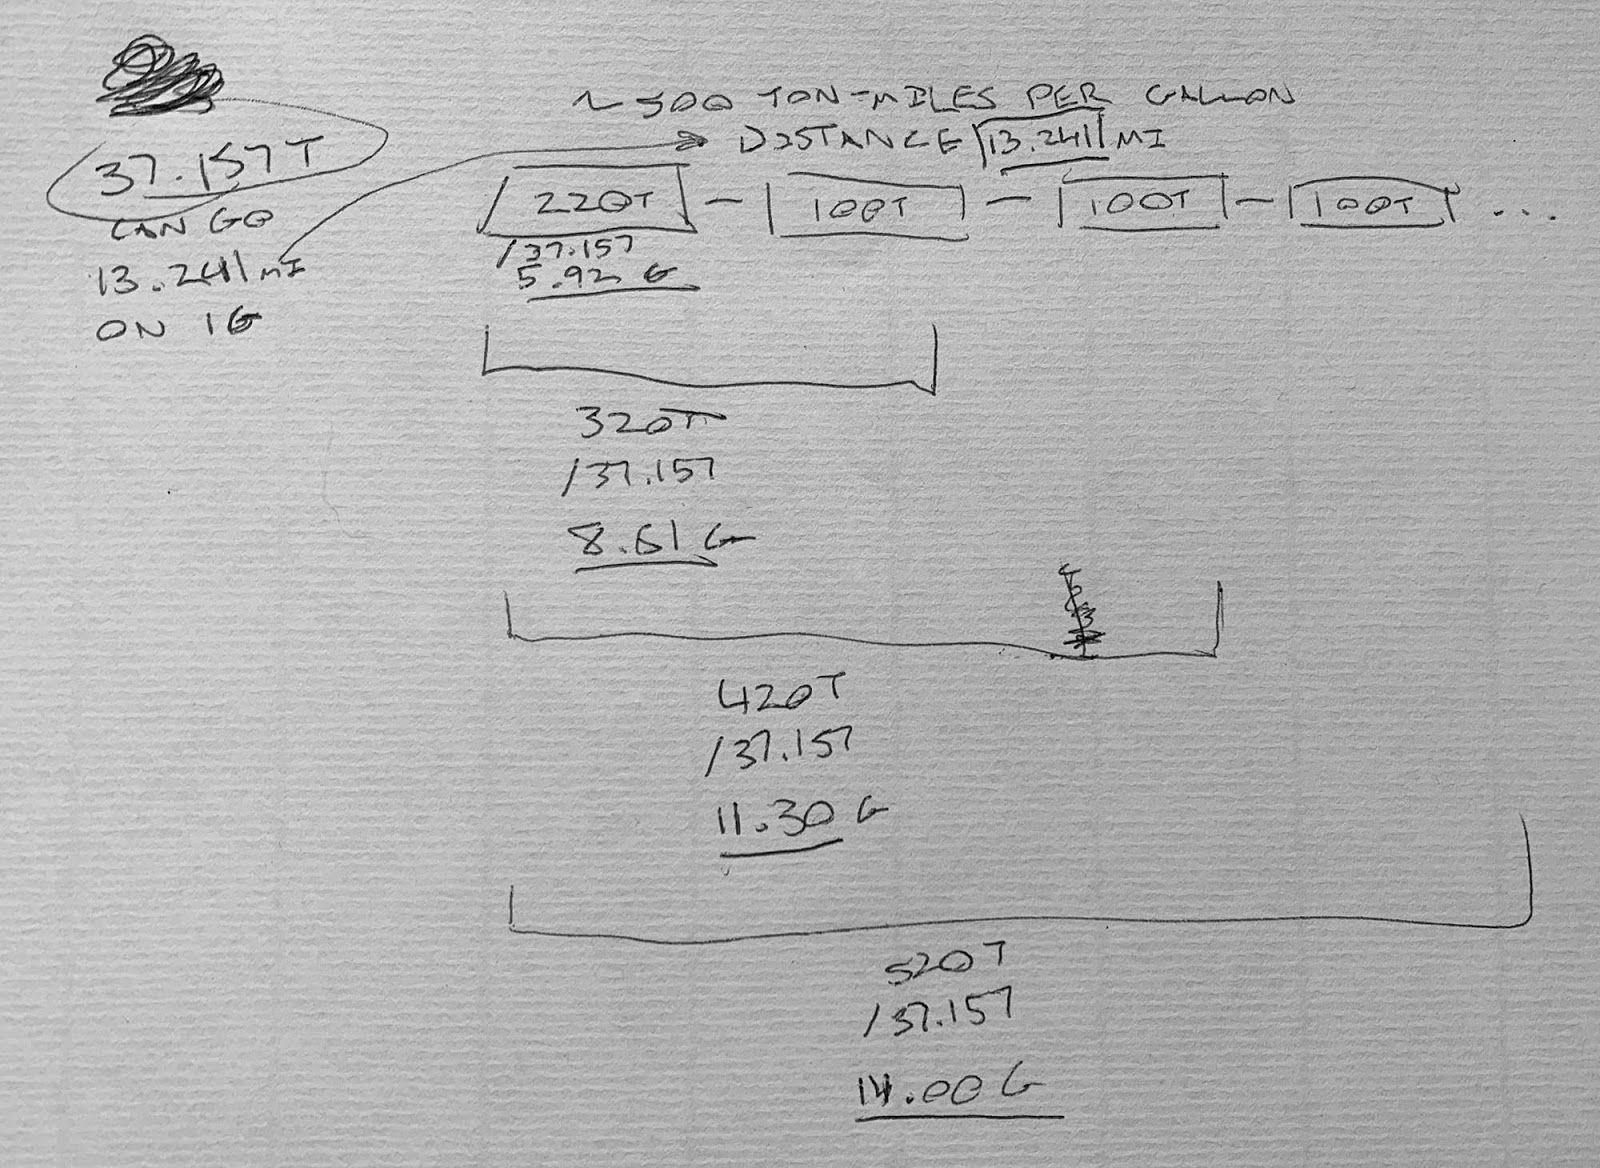 More of Nick’s handwritten notes, estimating how many gallons of fuel the train will need depending on how many cars are attached.